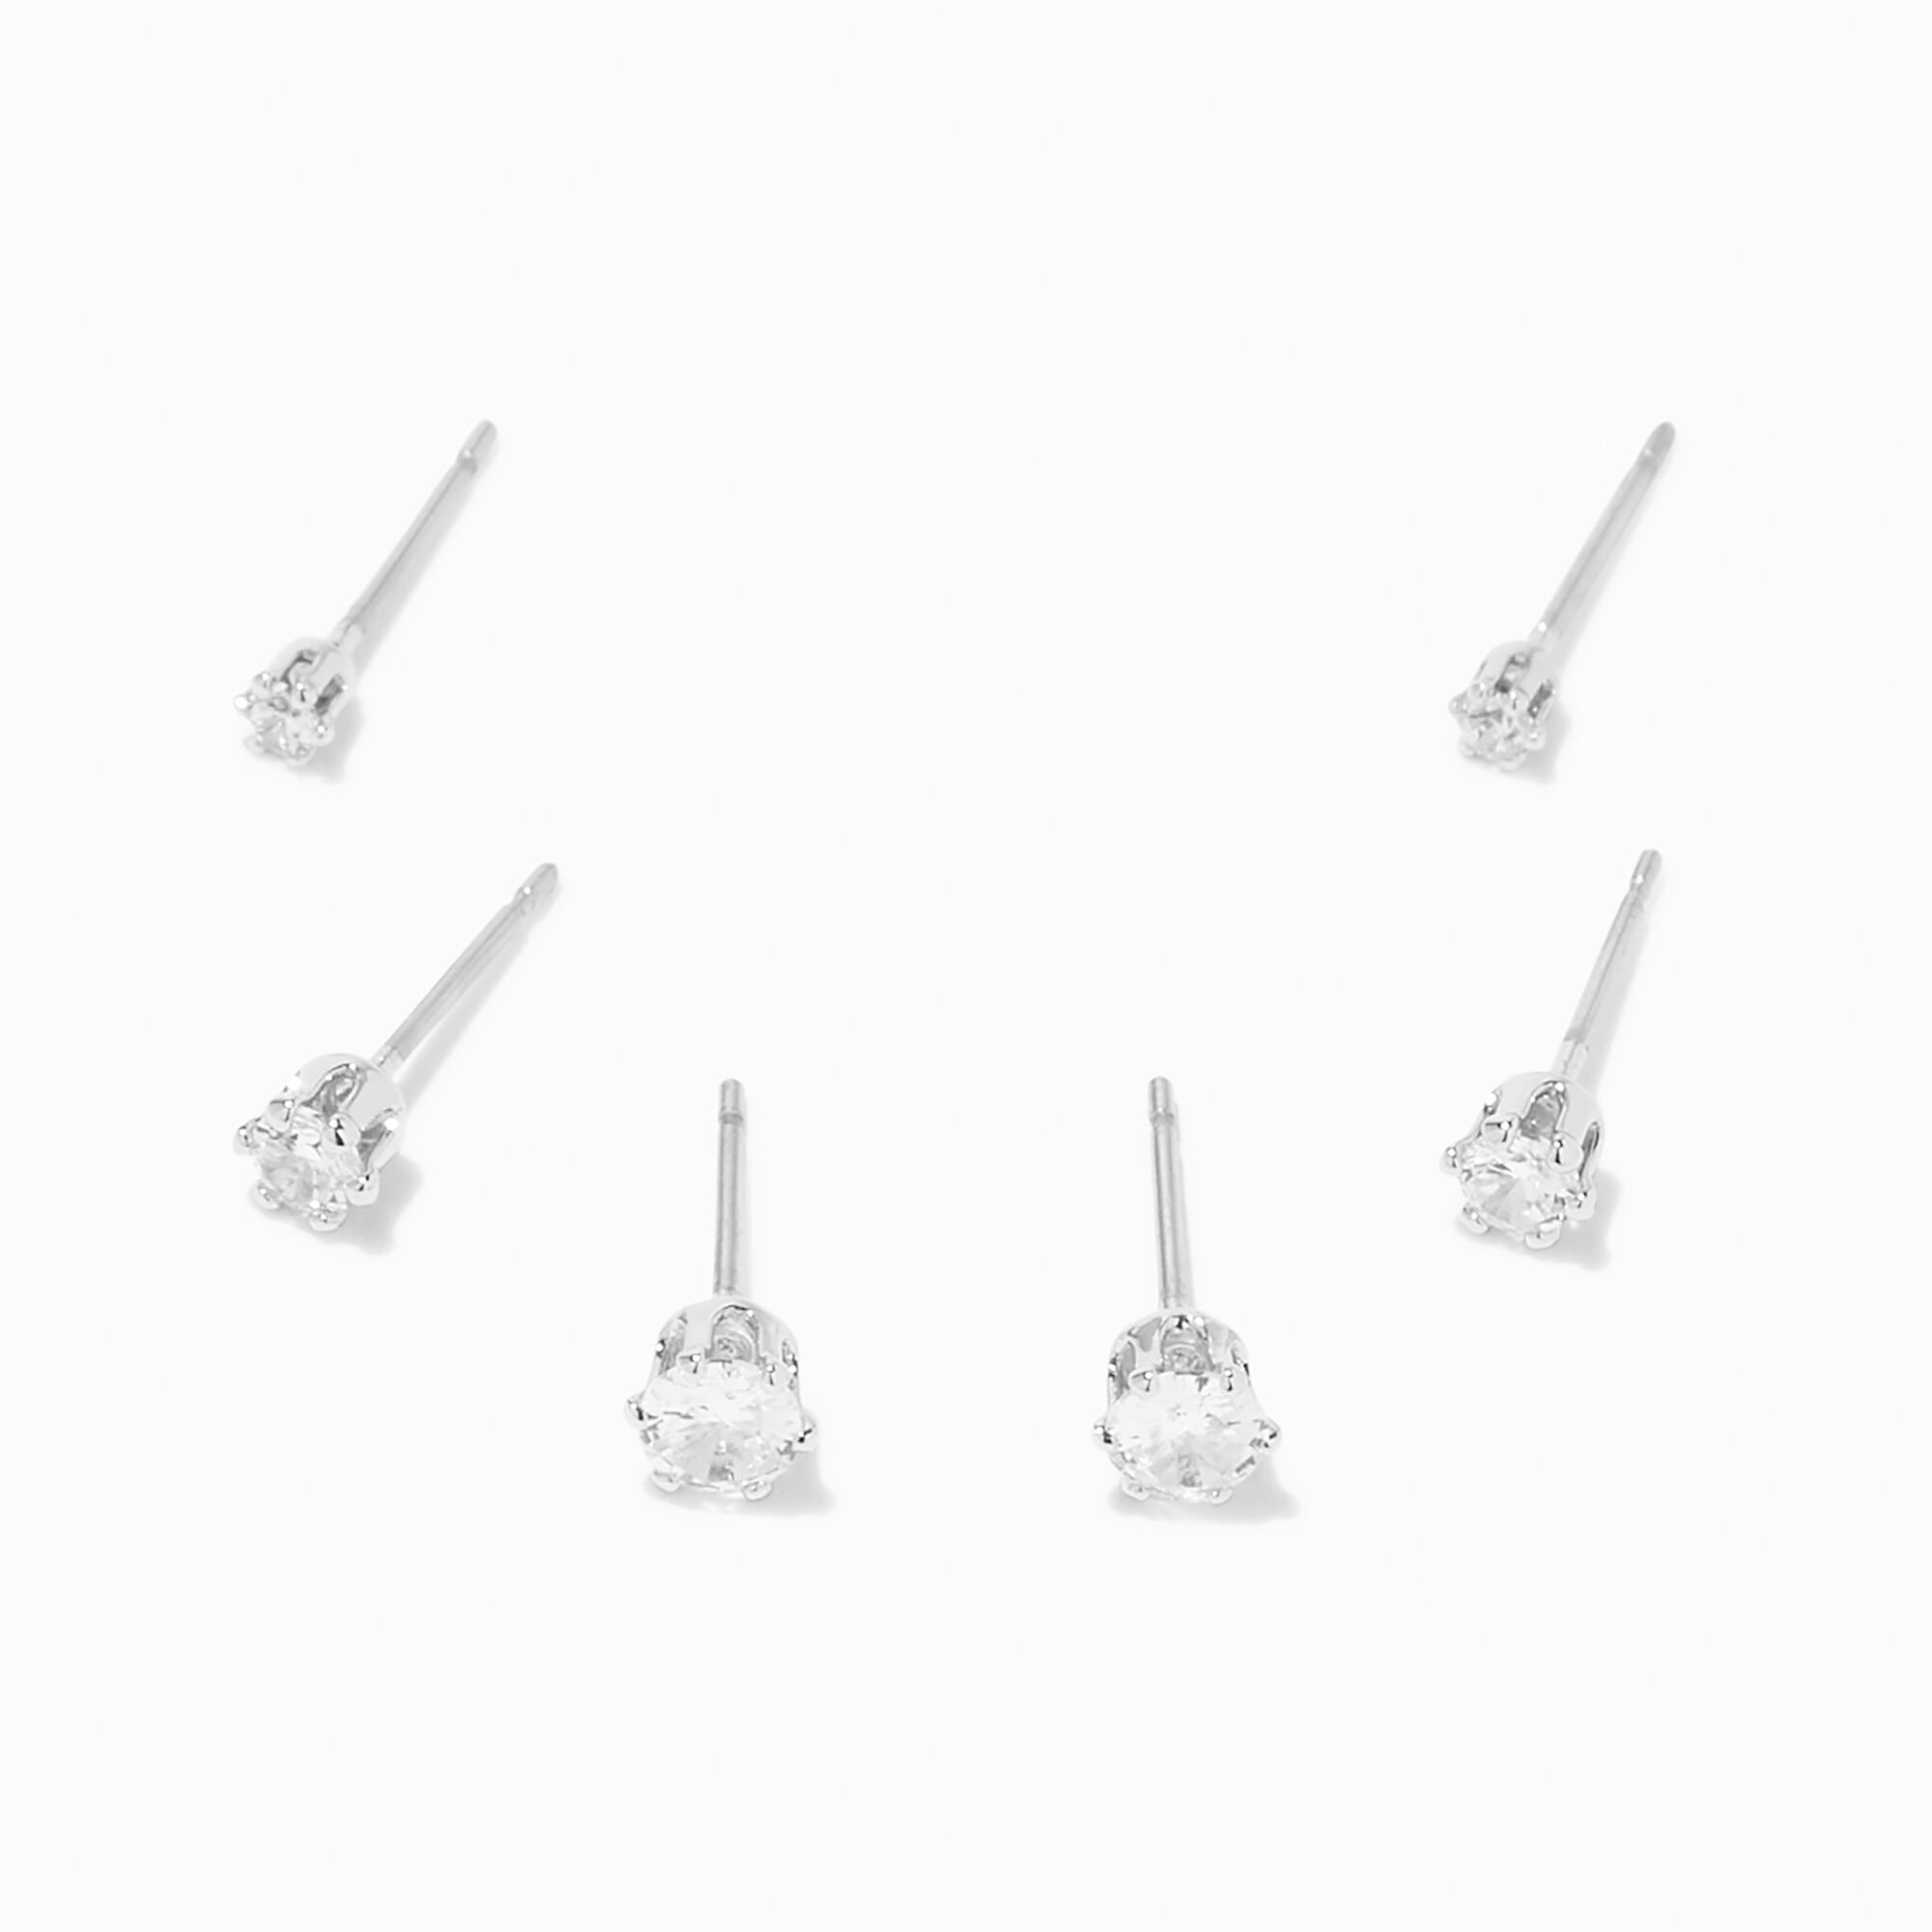 View Claires Tone Cubic Zirconia 2MM 3MM 4MM Round Stud Earrings 3 Pack Silver information